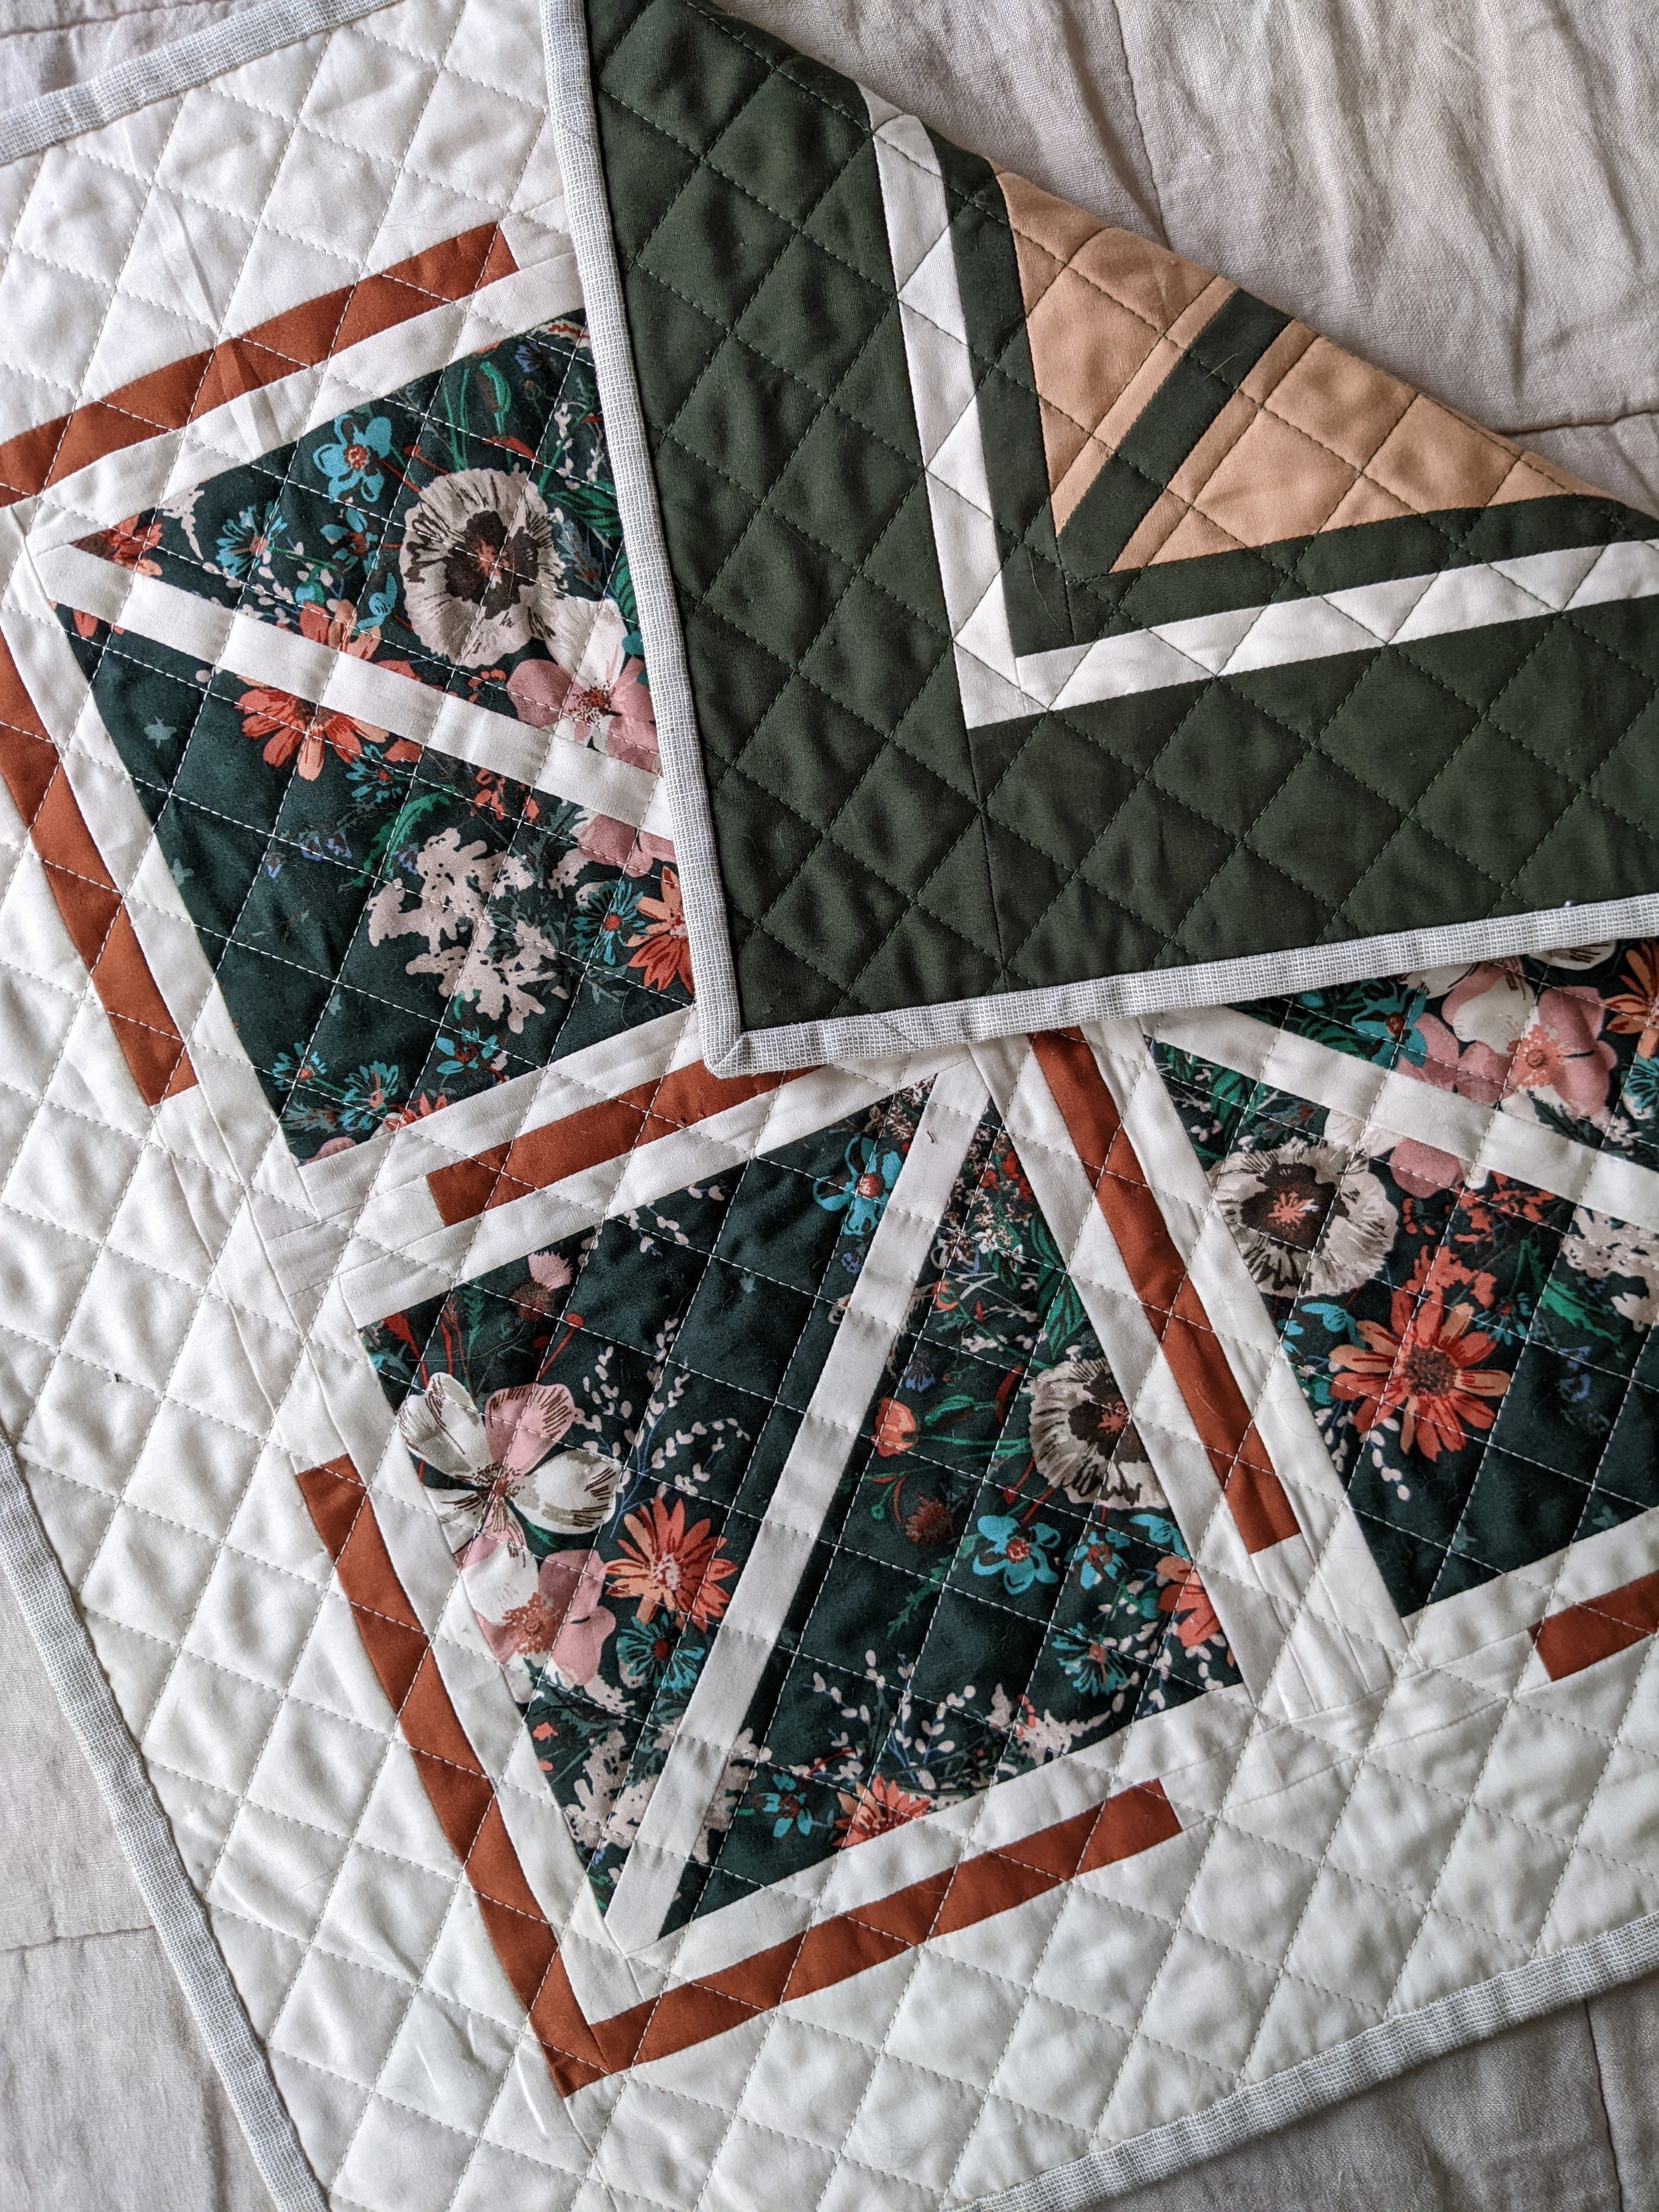 Quilt Top Layout